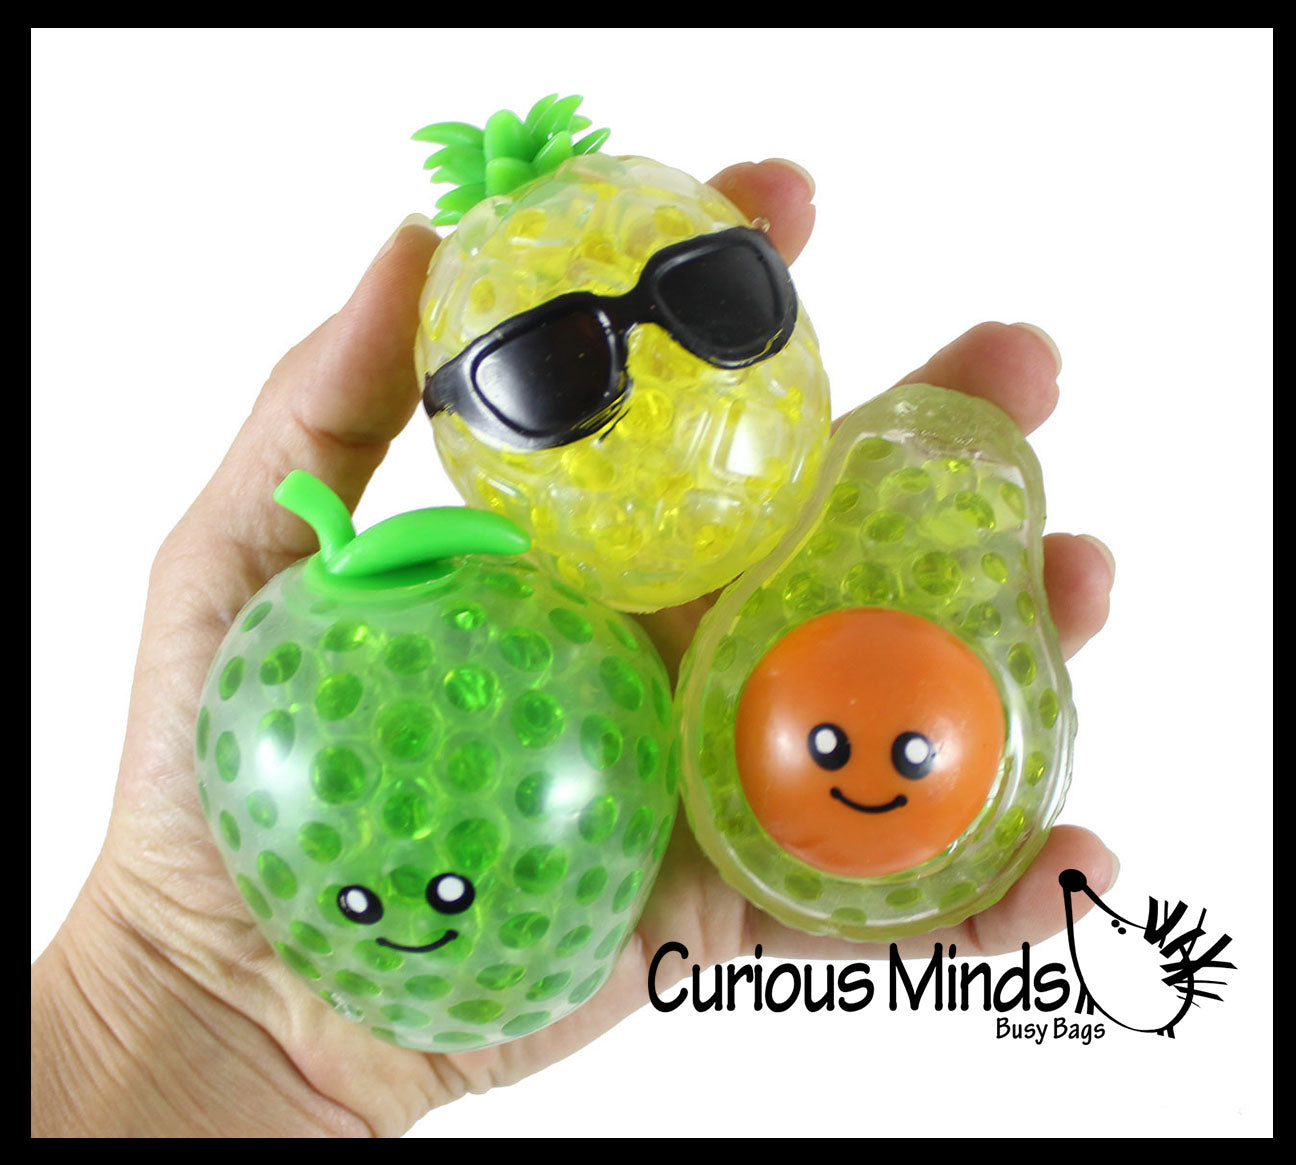 Small Fruit Water Bead Filled Squeeze Stress Balls with Faces - Sensory, Stress, Fidget Toy - Pineapple, Strawberry, Avocado, Watermelon, Apple